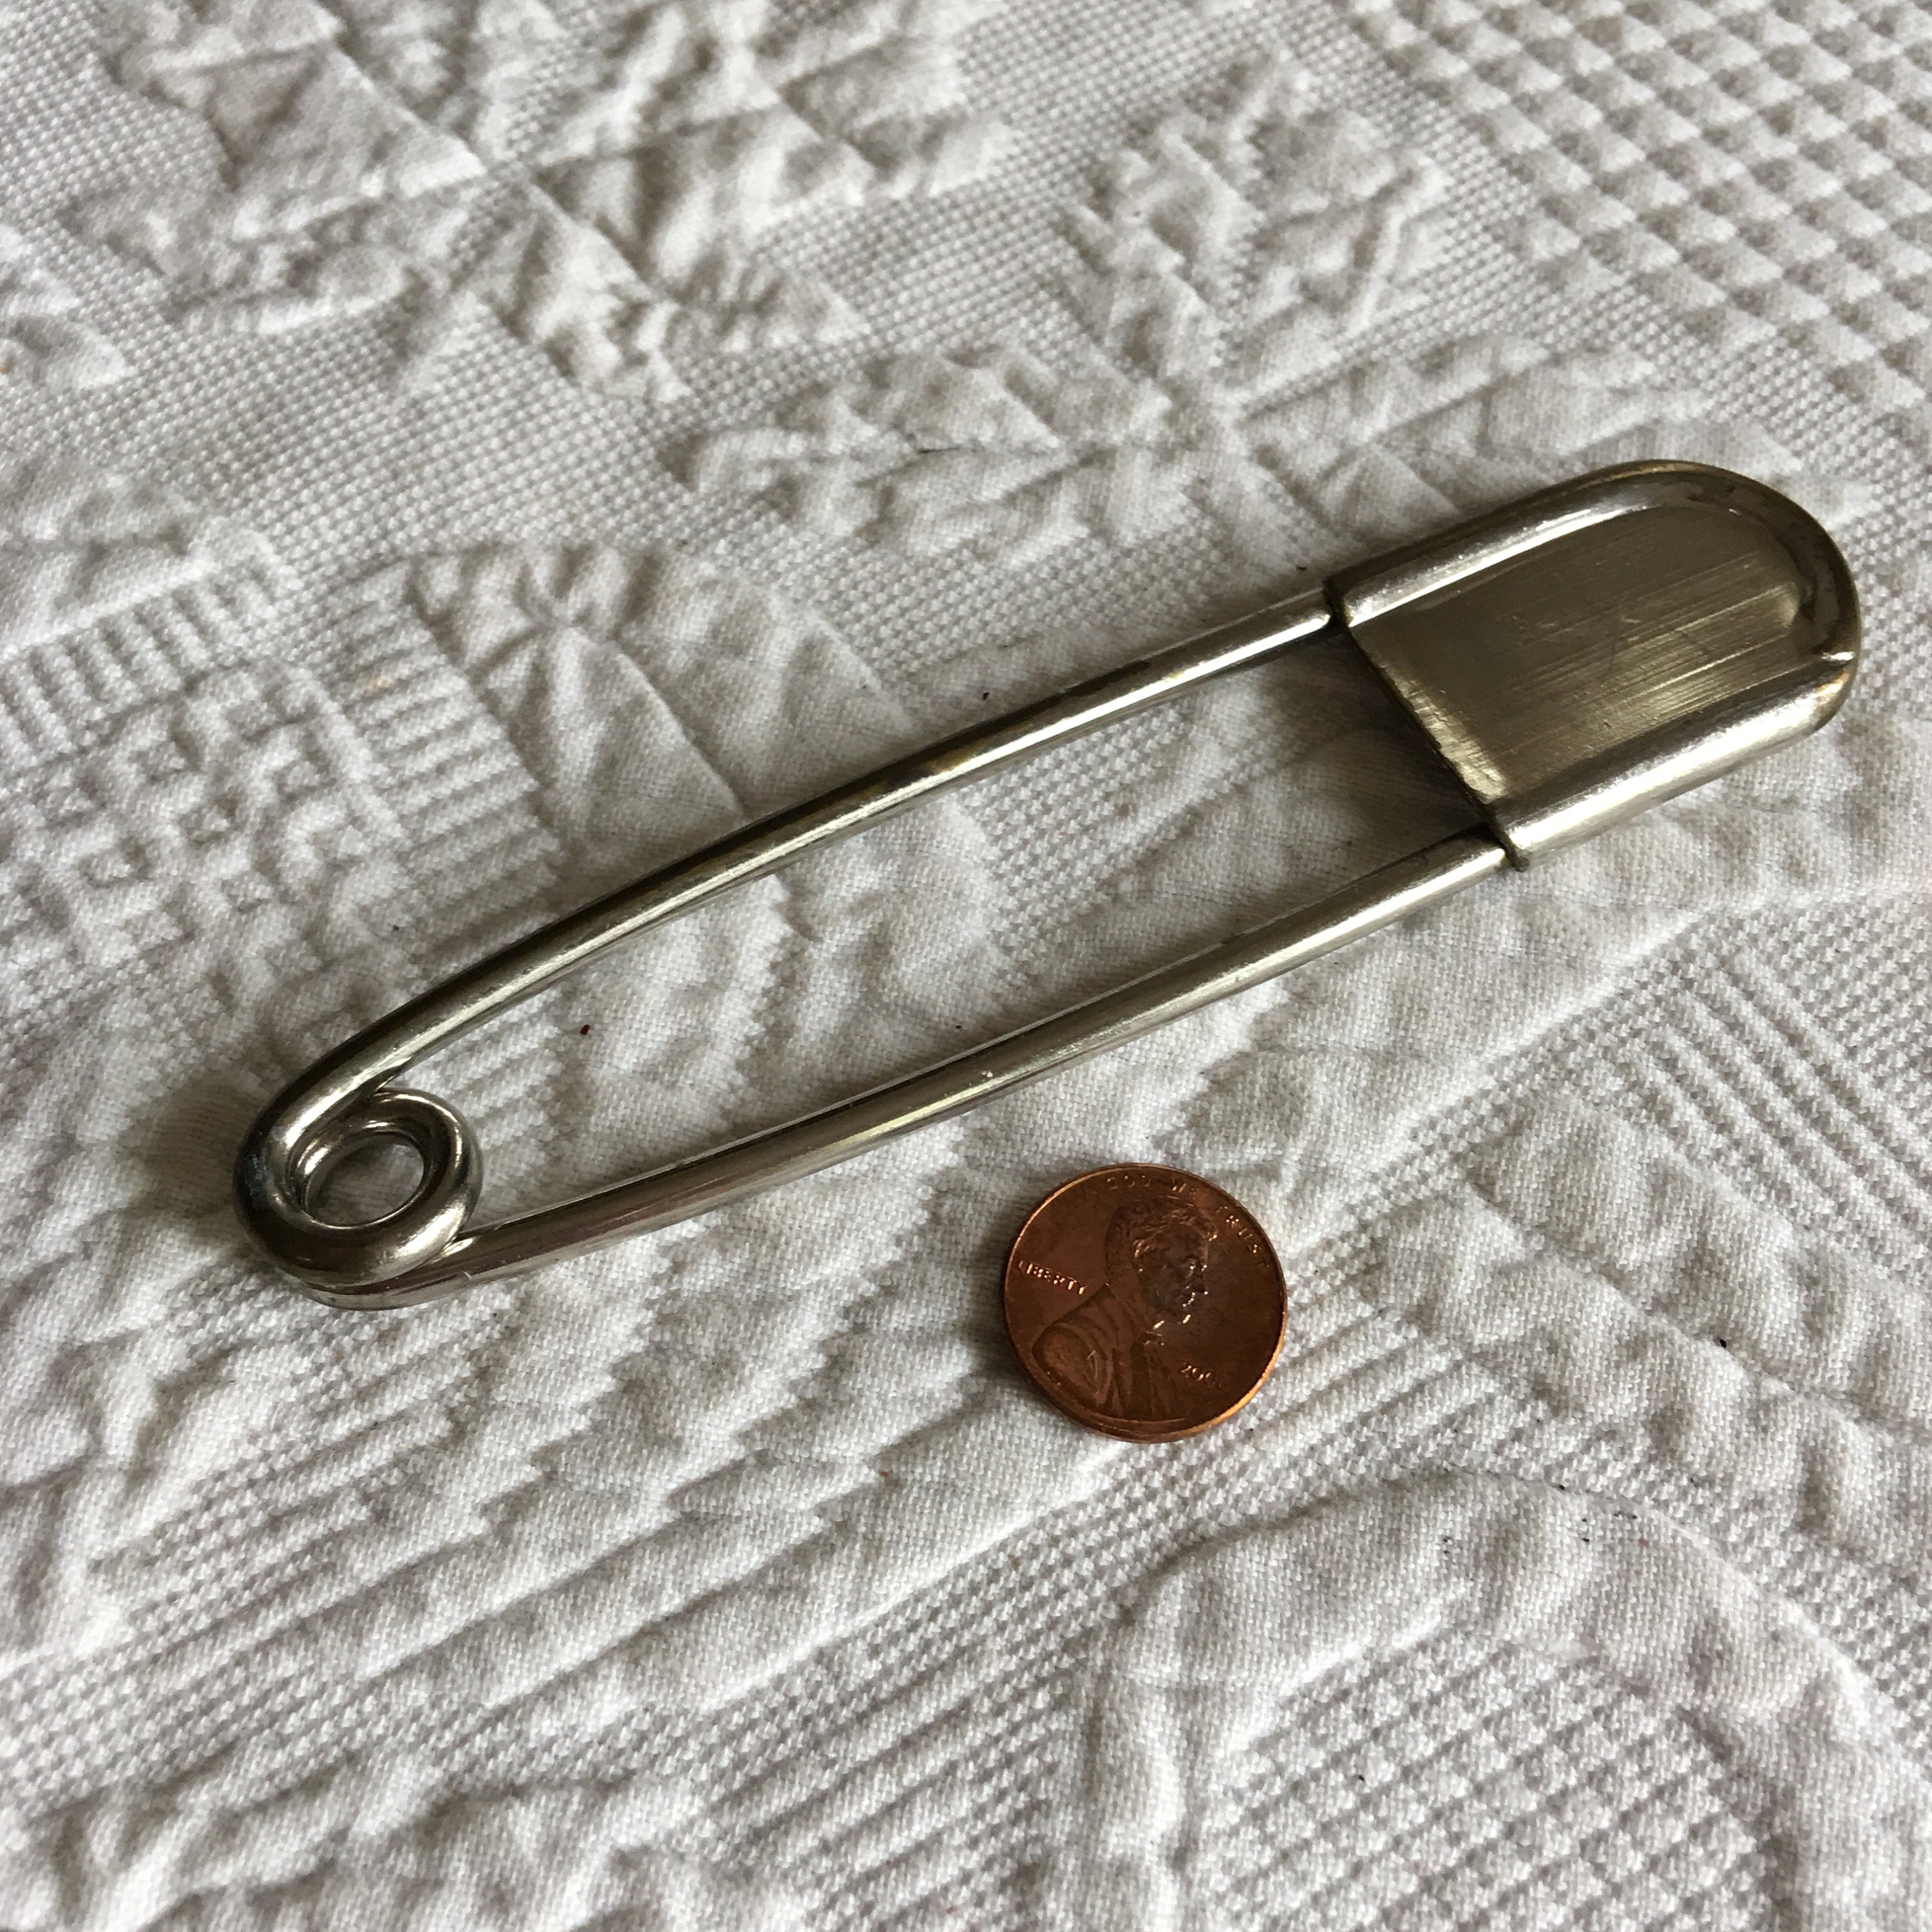 Large Safety Pin Silver Blanket Pin Horse Pin Giant Heavy Duty